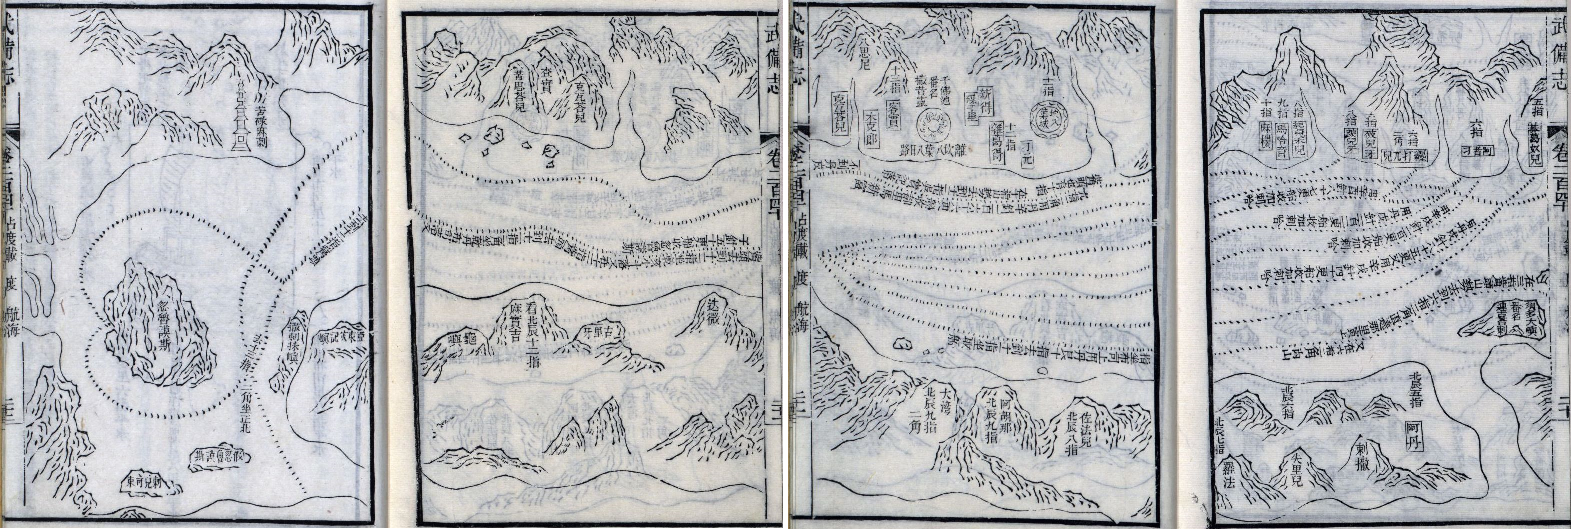 Wu bei zhi 1644 map of Admiral Zheng He's Voyage, page pairs 22-21 (19-20 of 20)